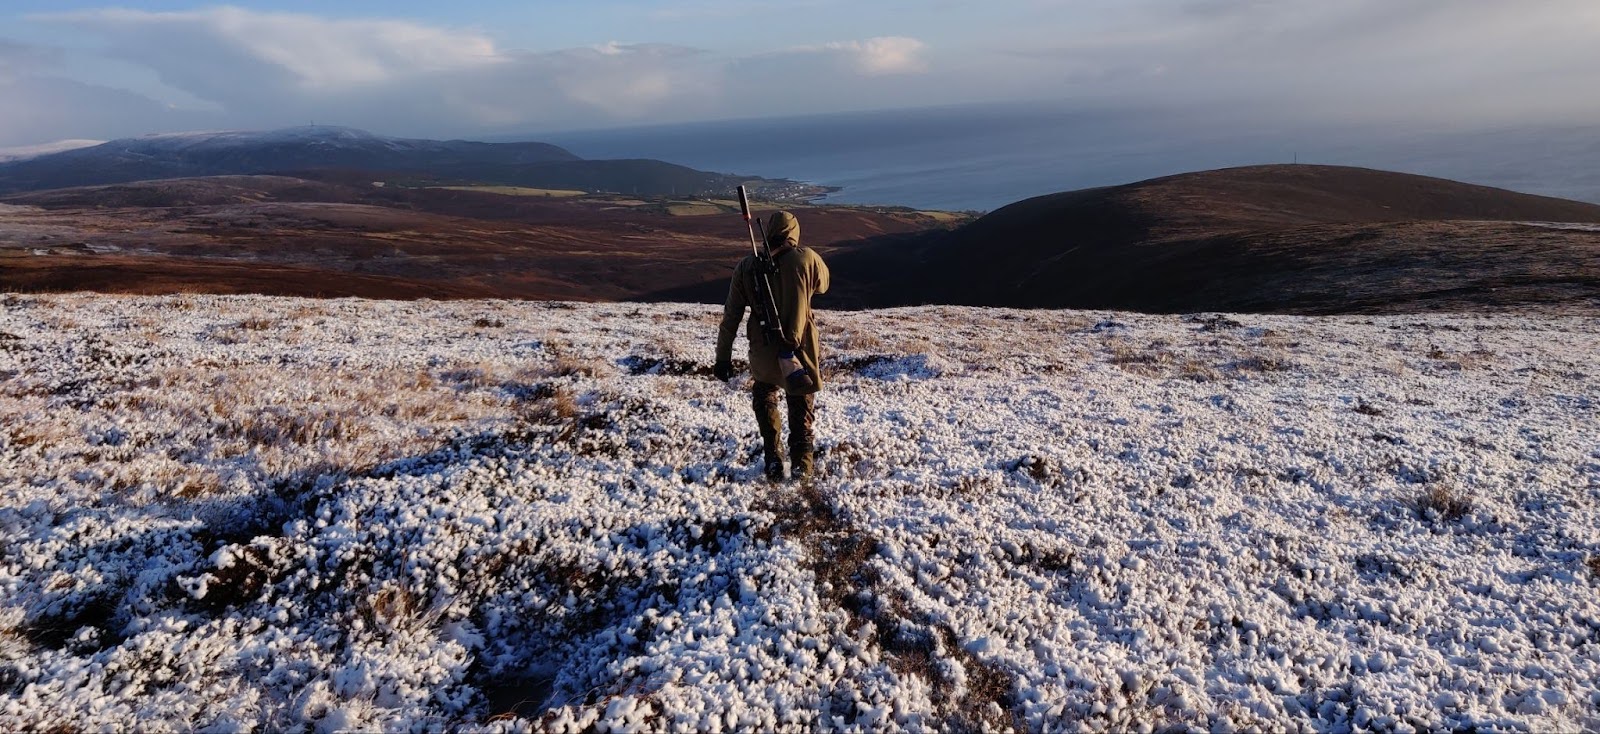 A person standing on a snowy hill, enjoying the winter landscape from the highest point.